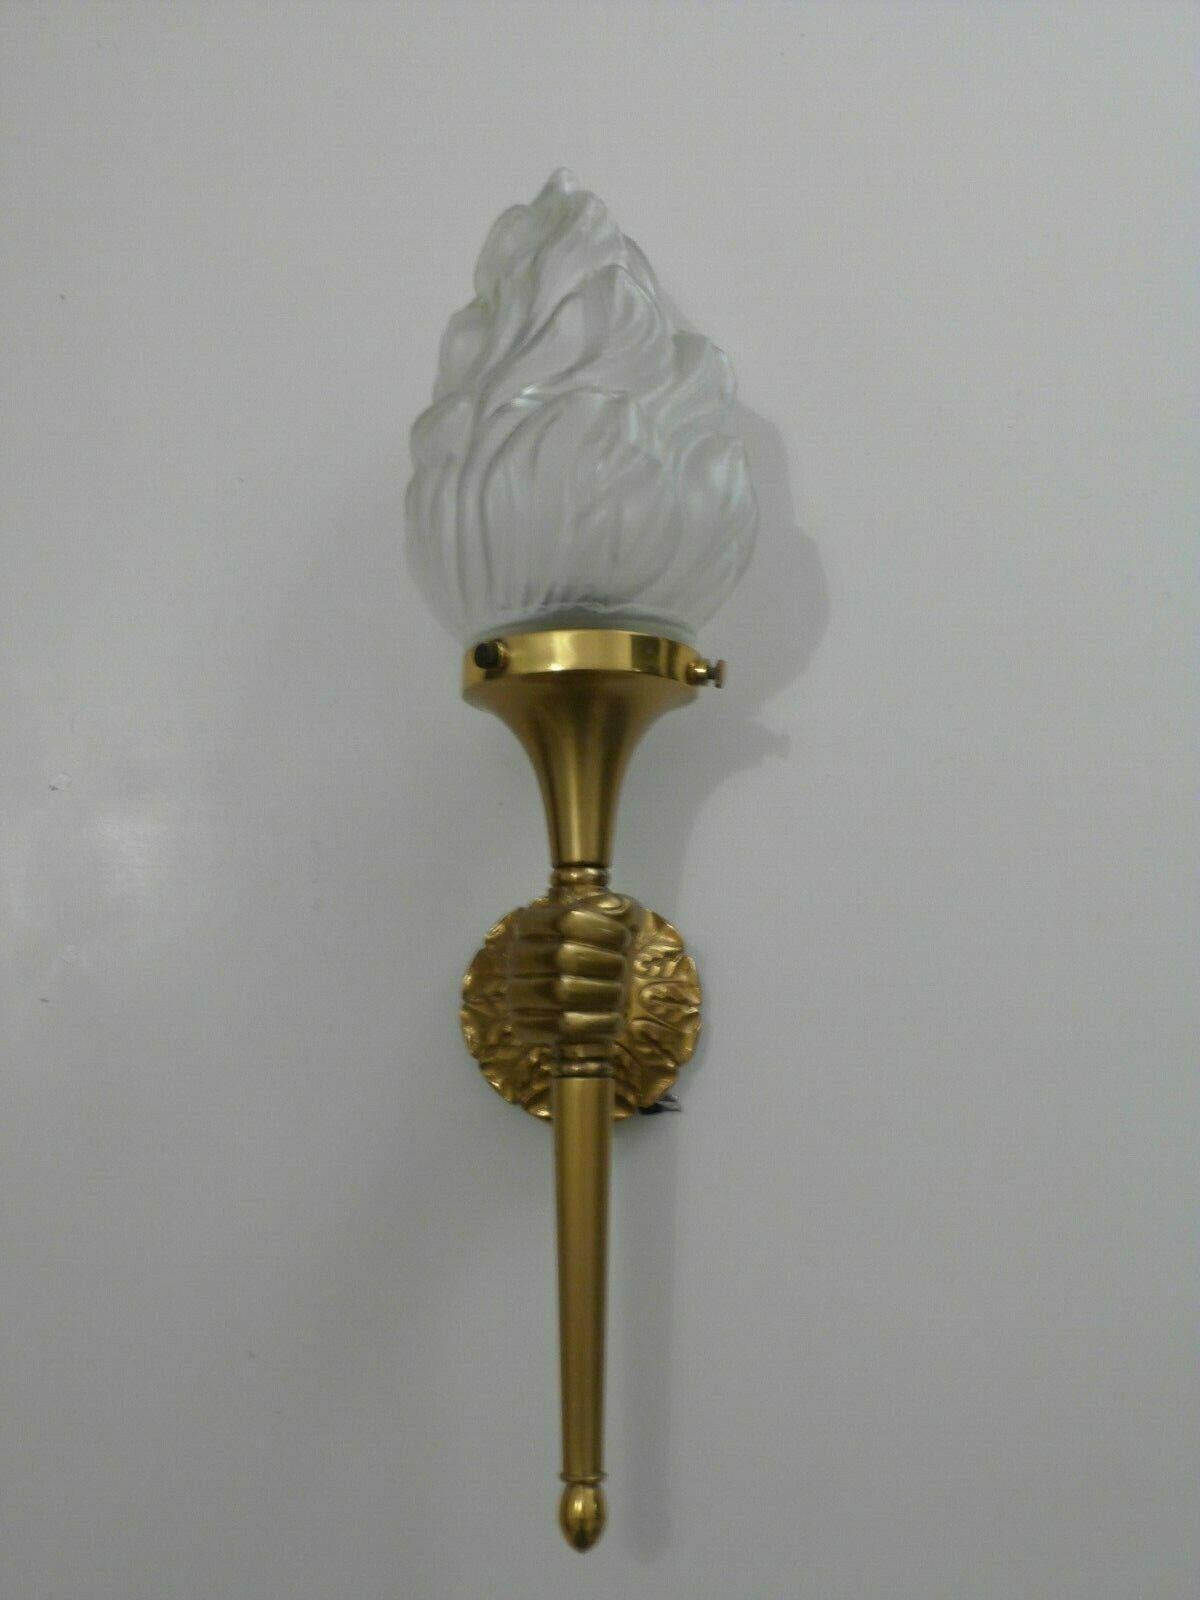 1930's French Art Deco Gilt Bronze Hand / Fist Holding Torch. Attribution Maison Jansen. Single bulb with Art Glass flame shade.